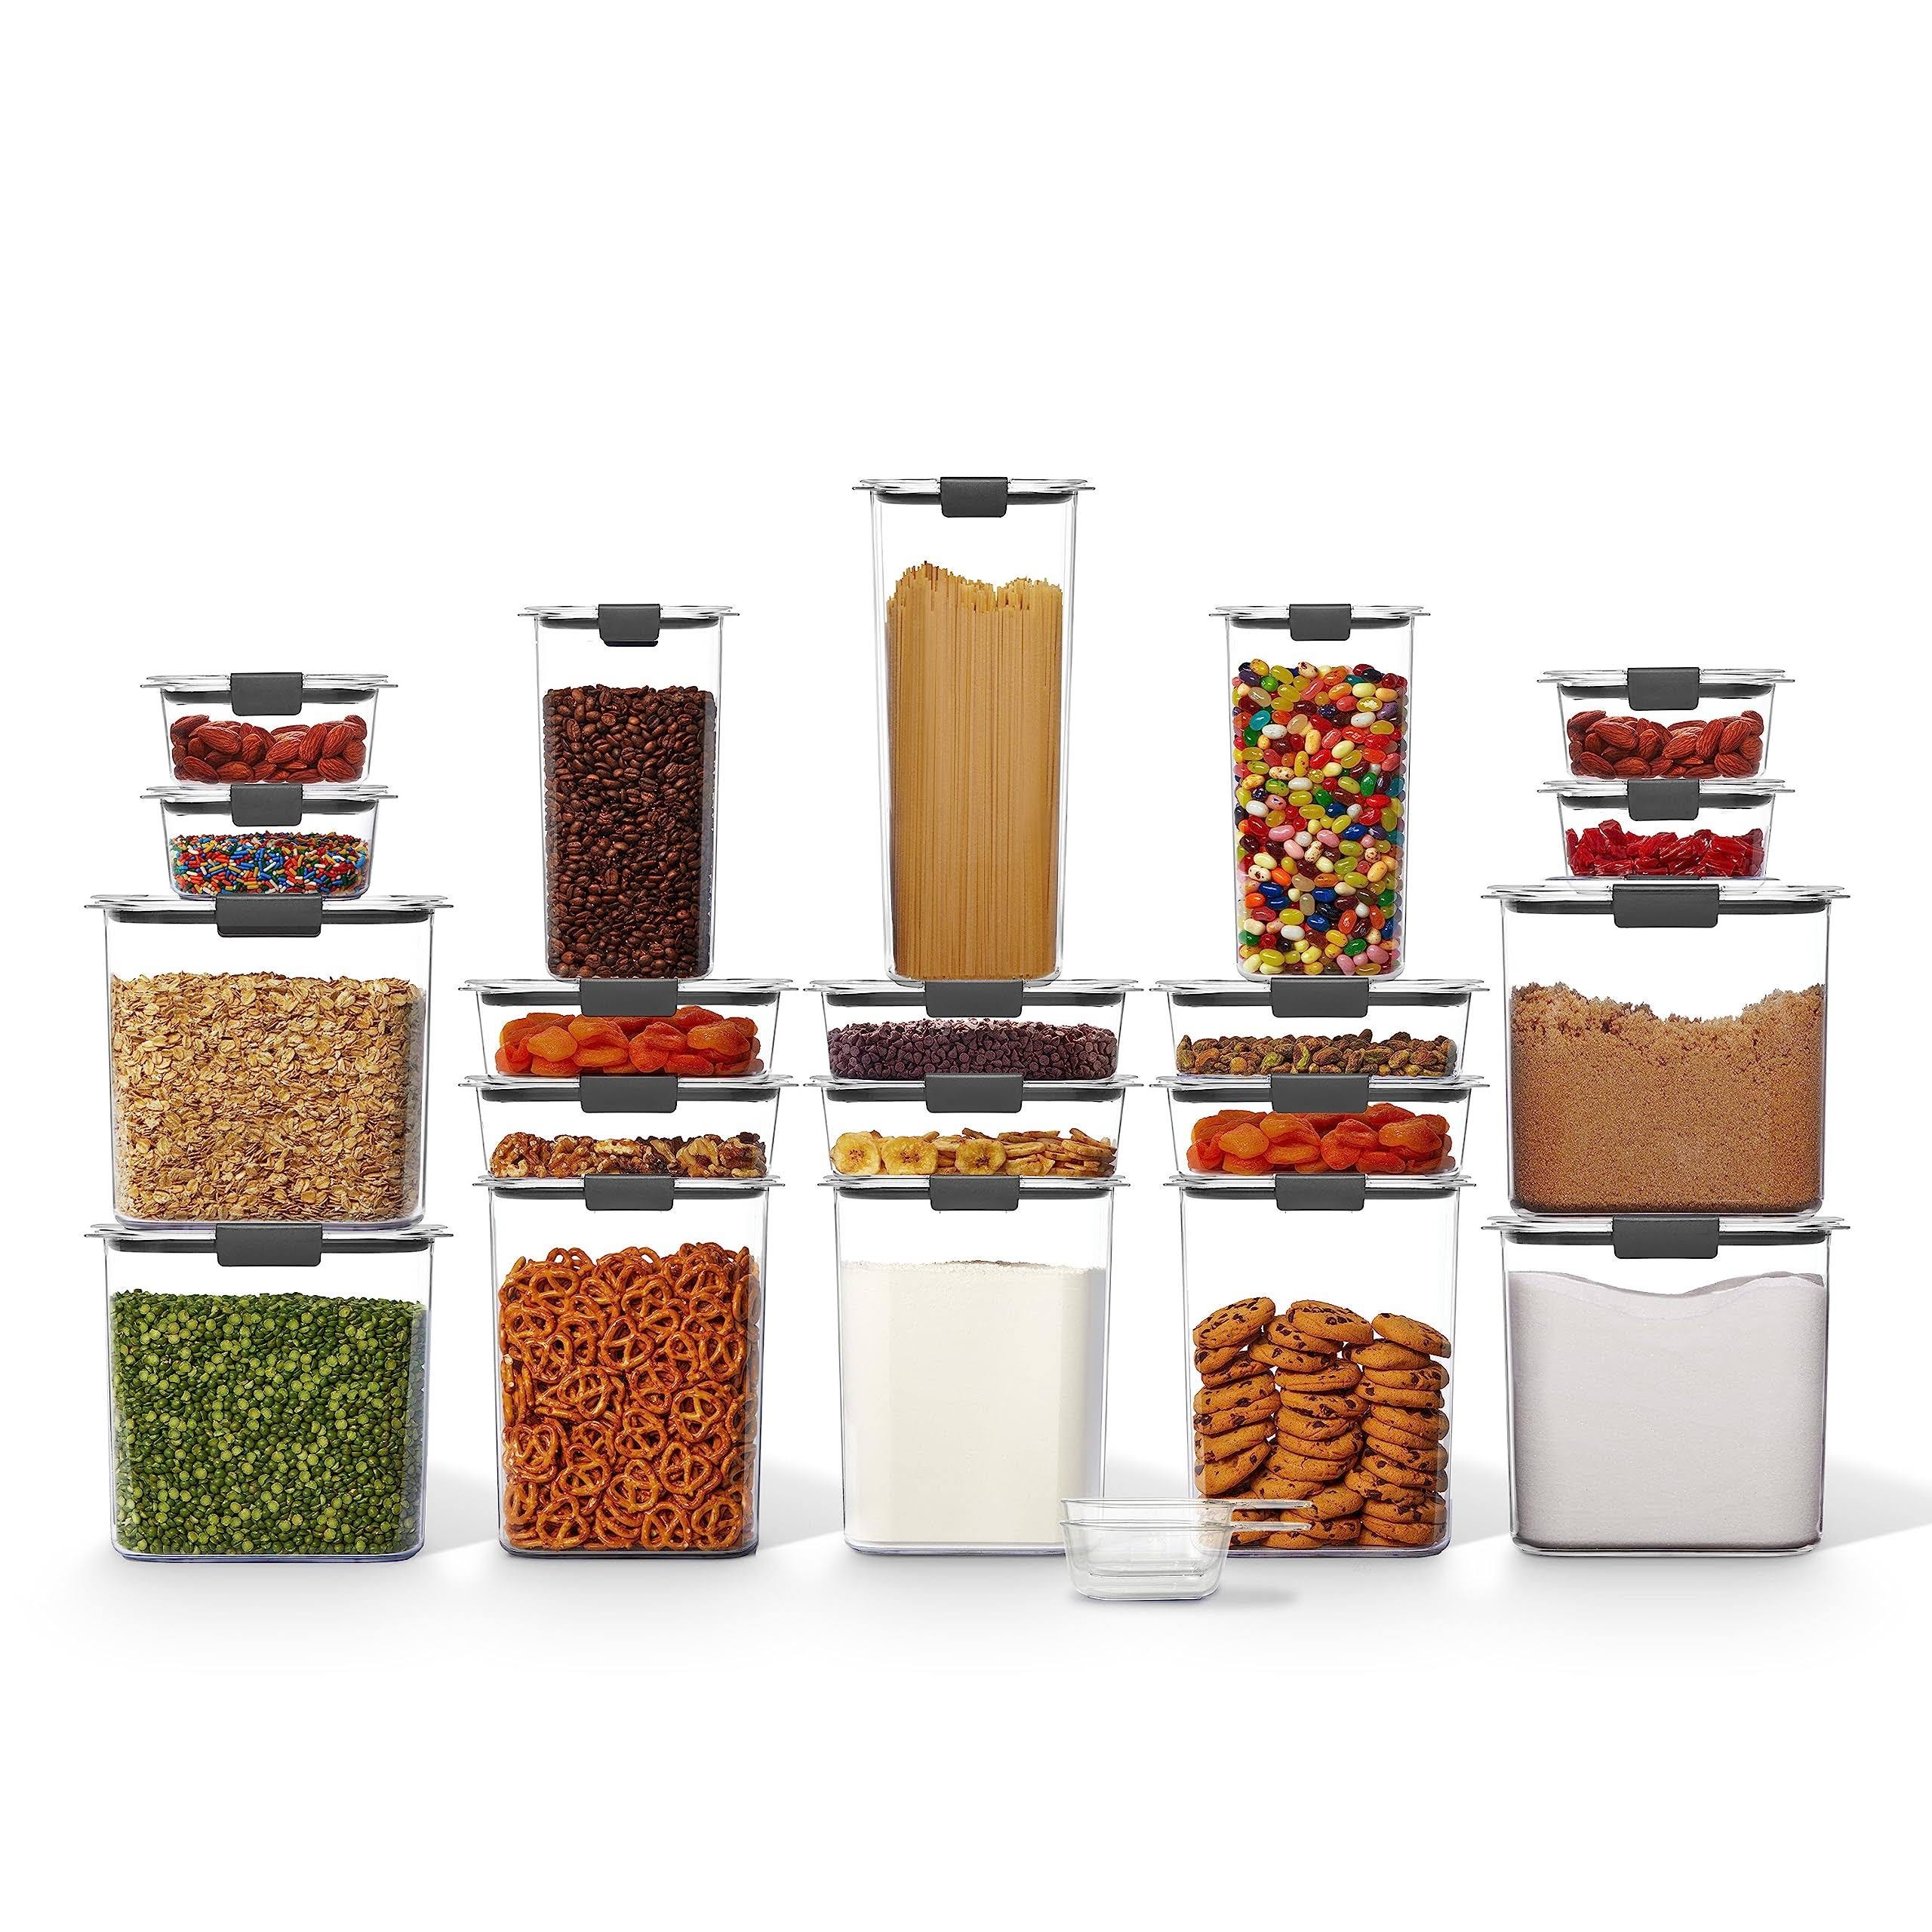 Rubbermaid Crystal Clear Food Storage Containers Set of 22 Pieces for Pantry Organization | Image